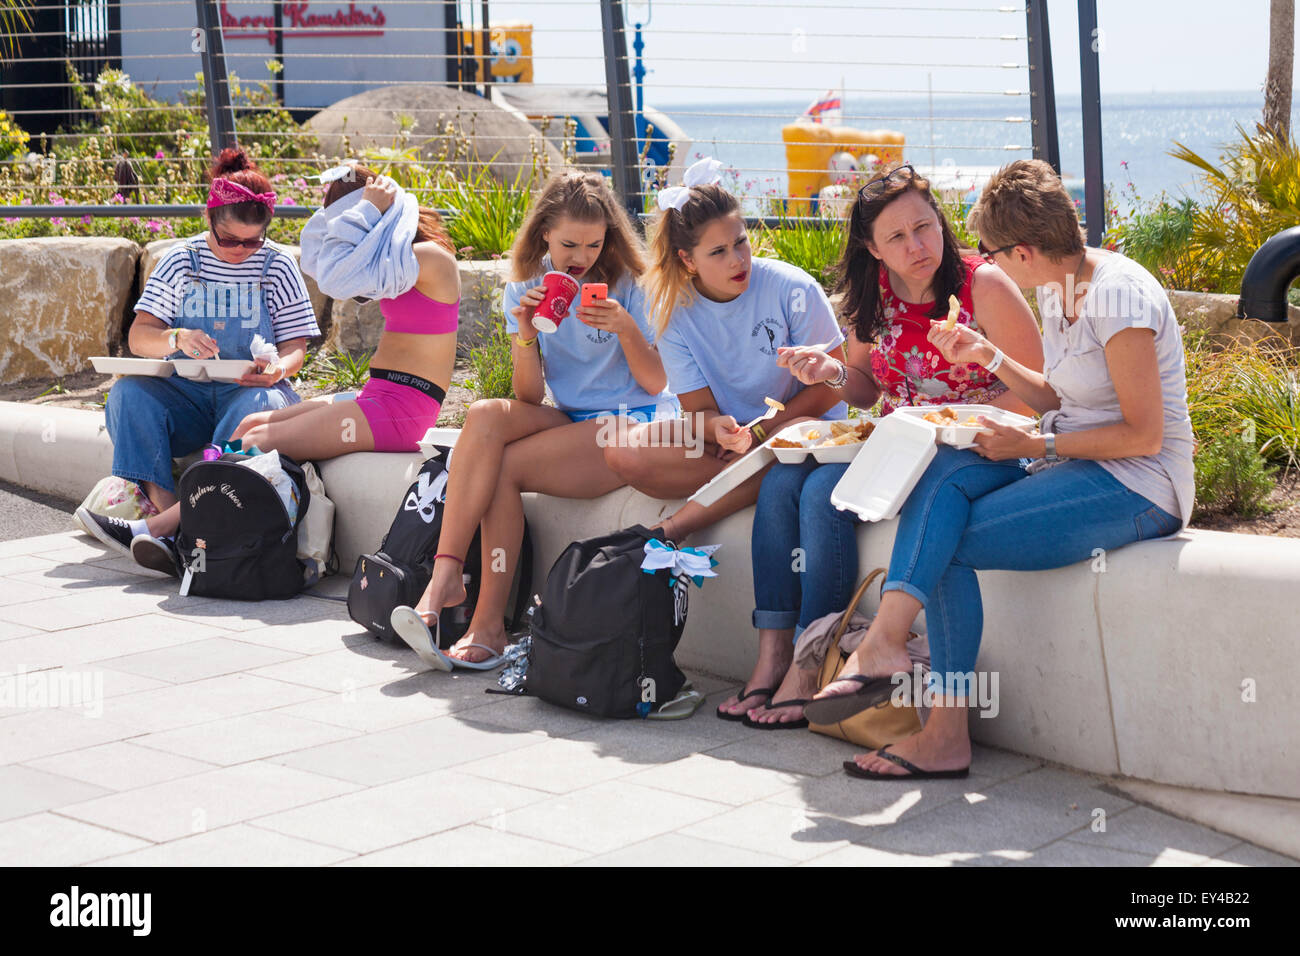 Group of females, women and teens, eating take away fish and chips at Bournemouth Pier Approach, Dorset UK outside Harry Ramsdens in July seaside Stock Photo